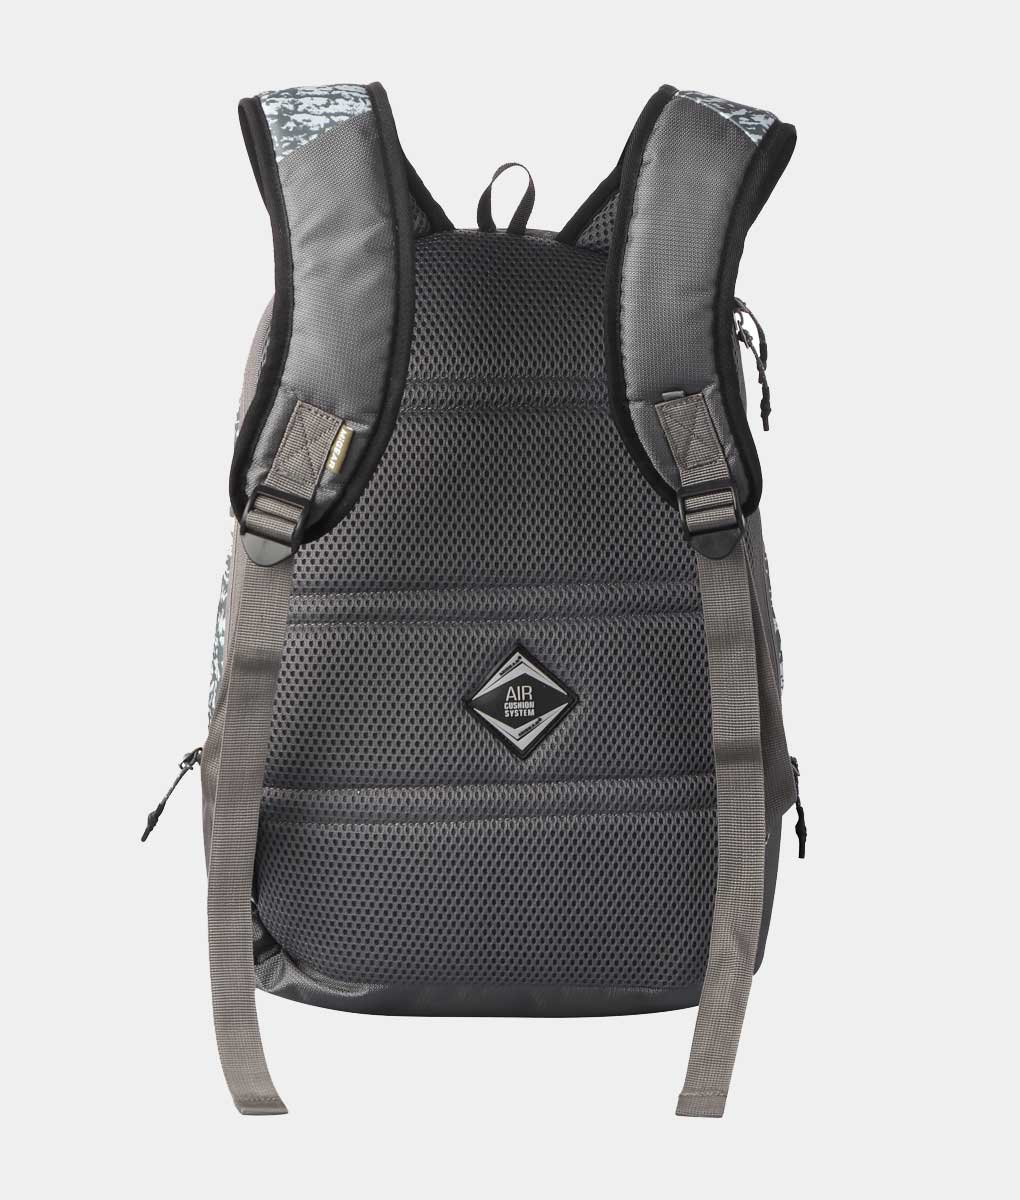 The Front Load Backpack